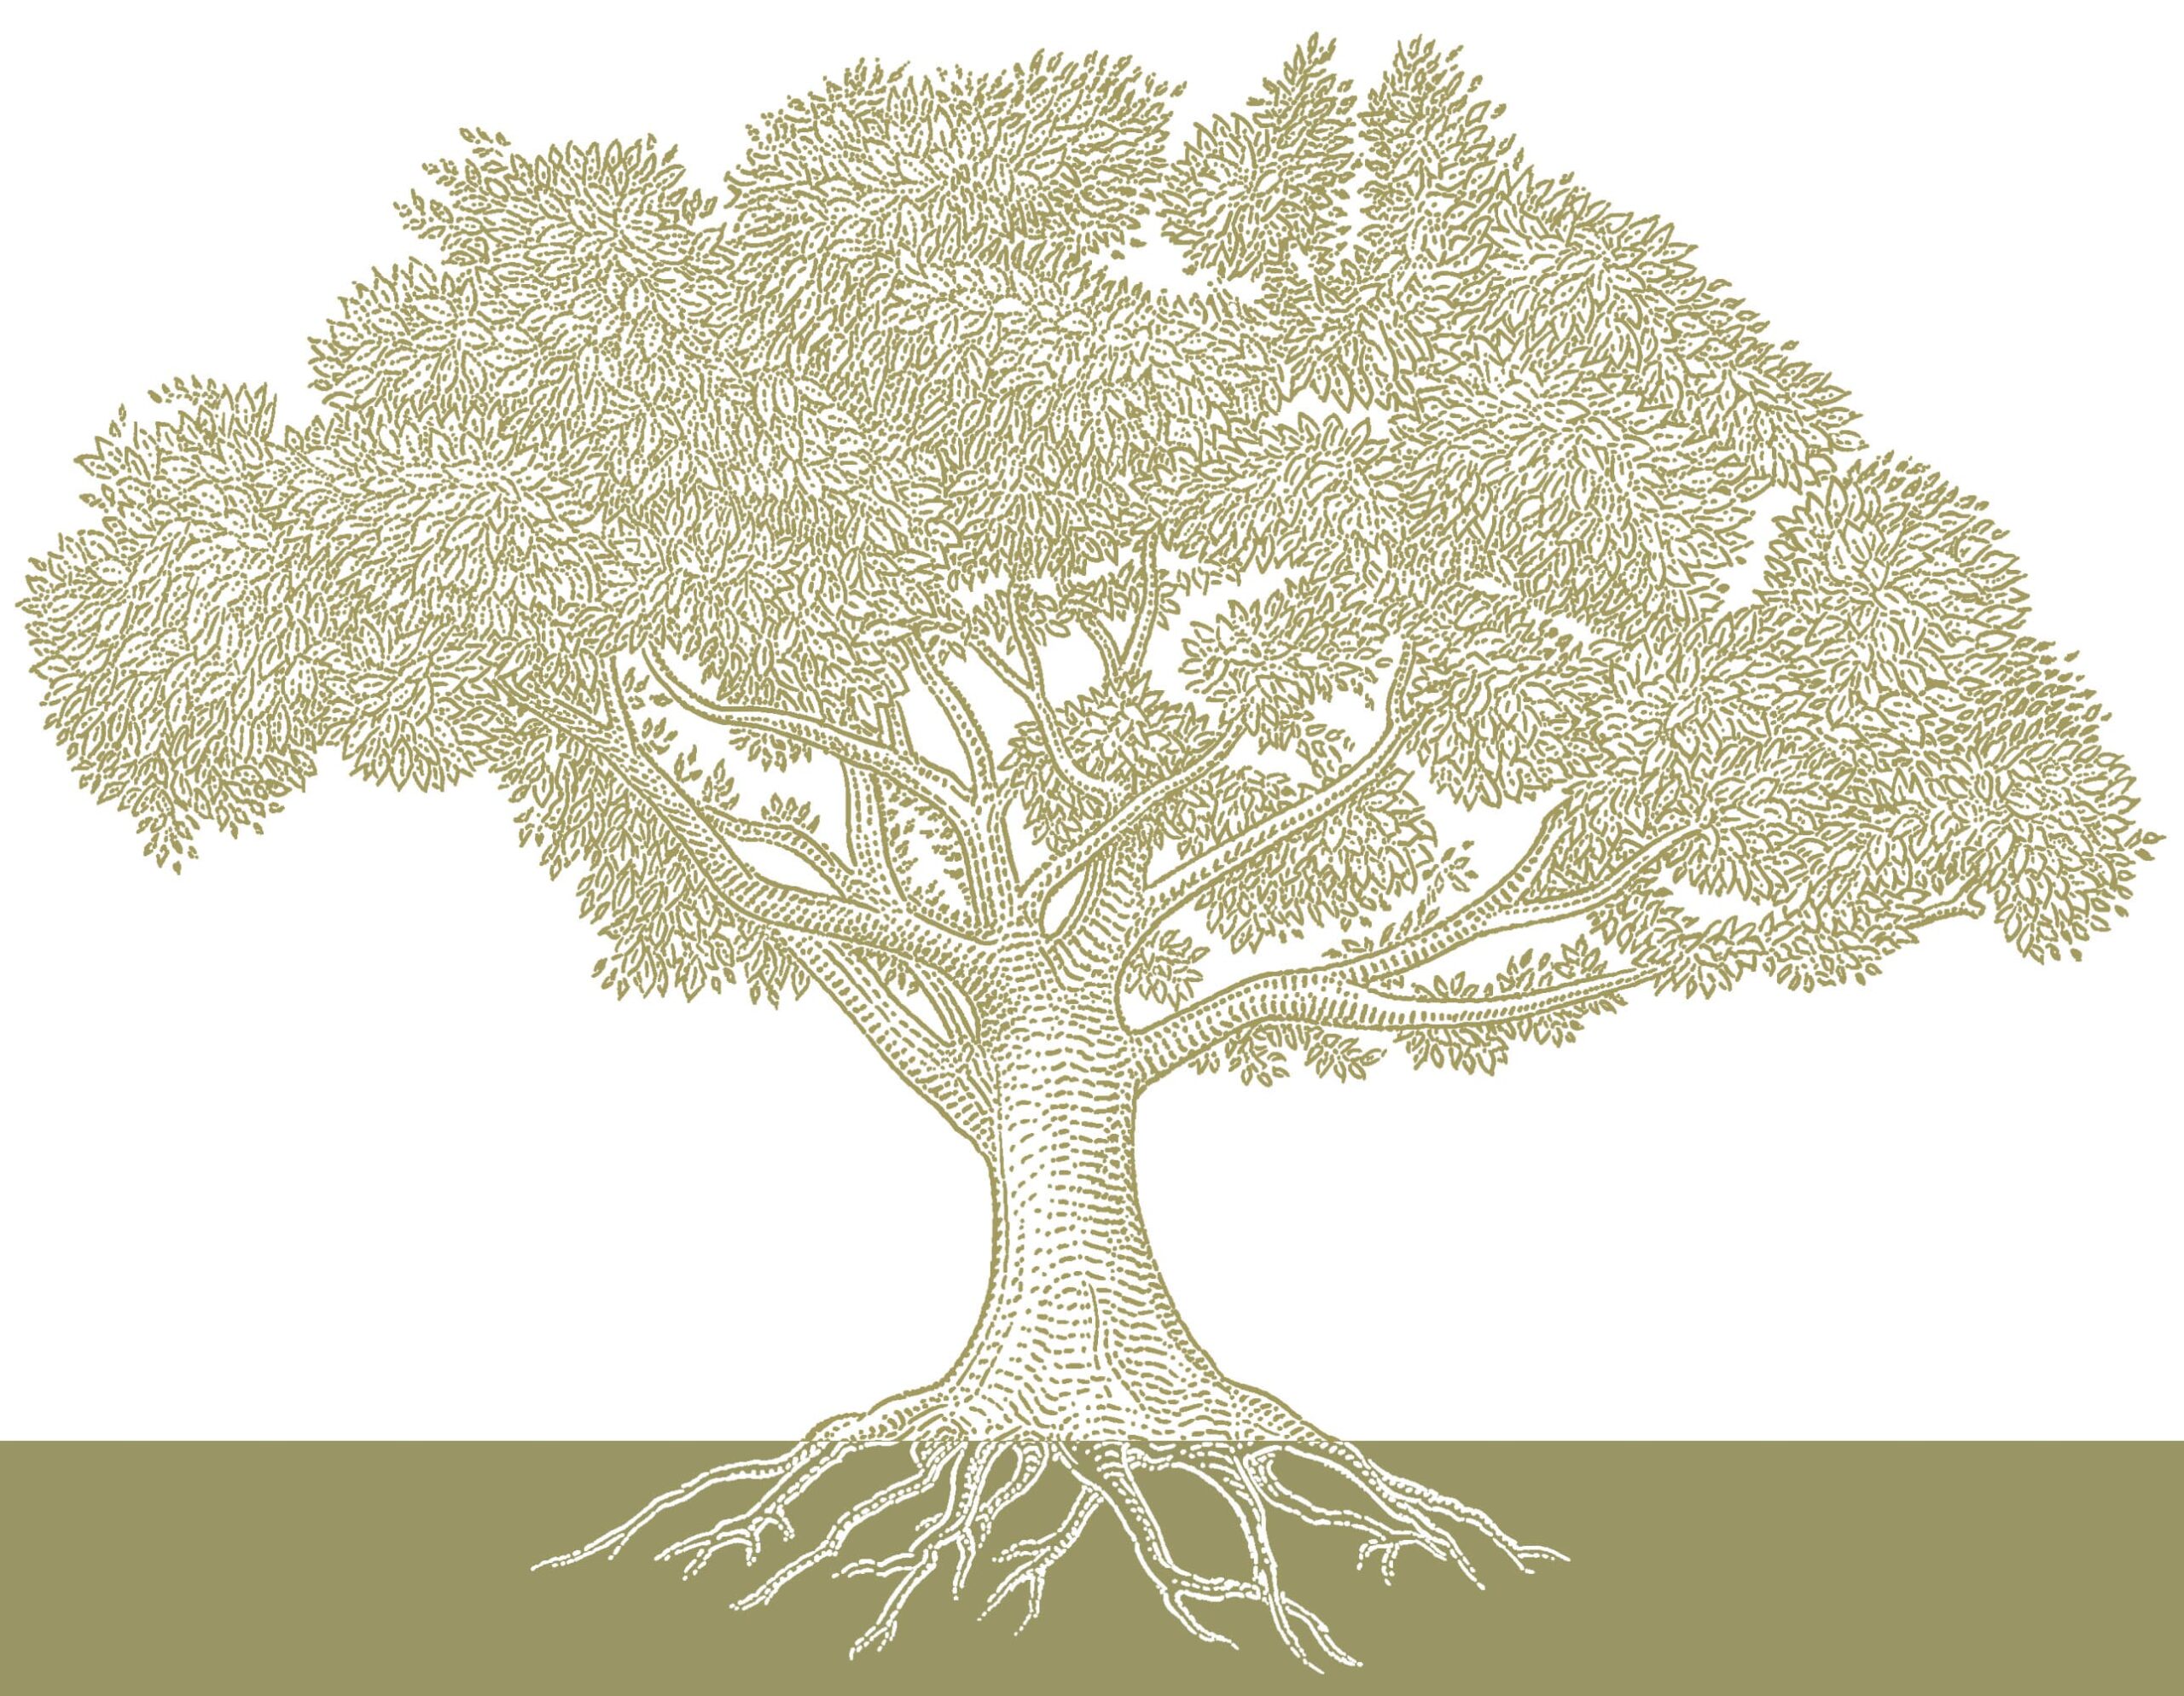 A digital illustration of a tree with its roots depicted against an olive-green background